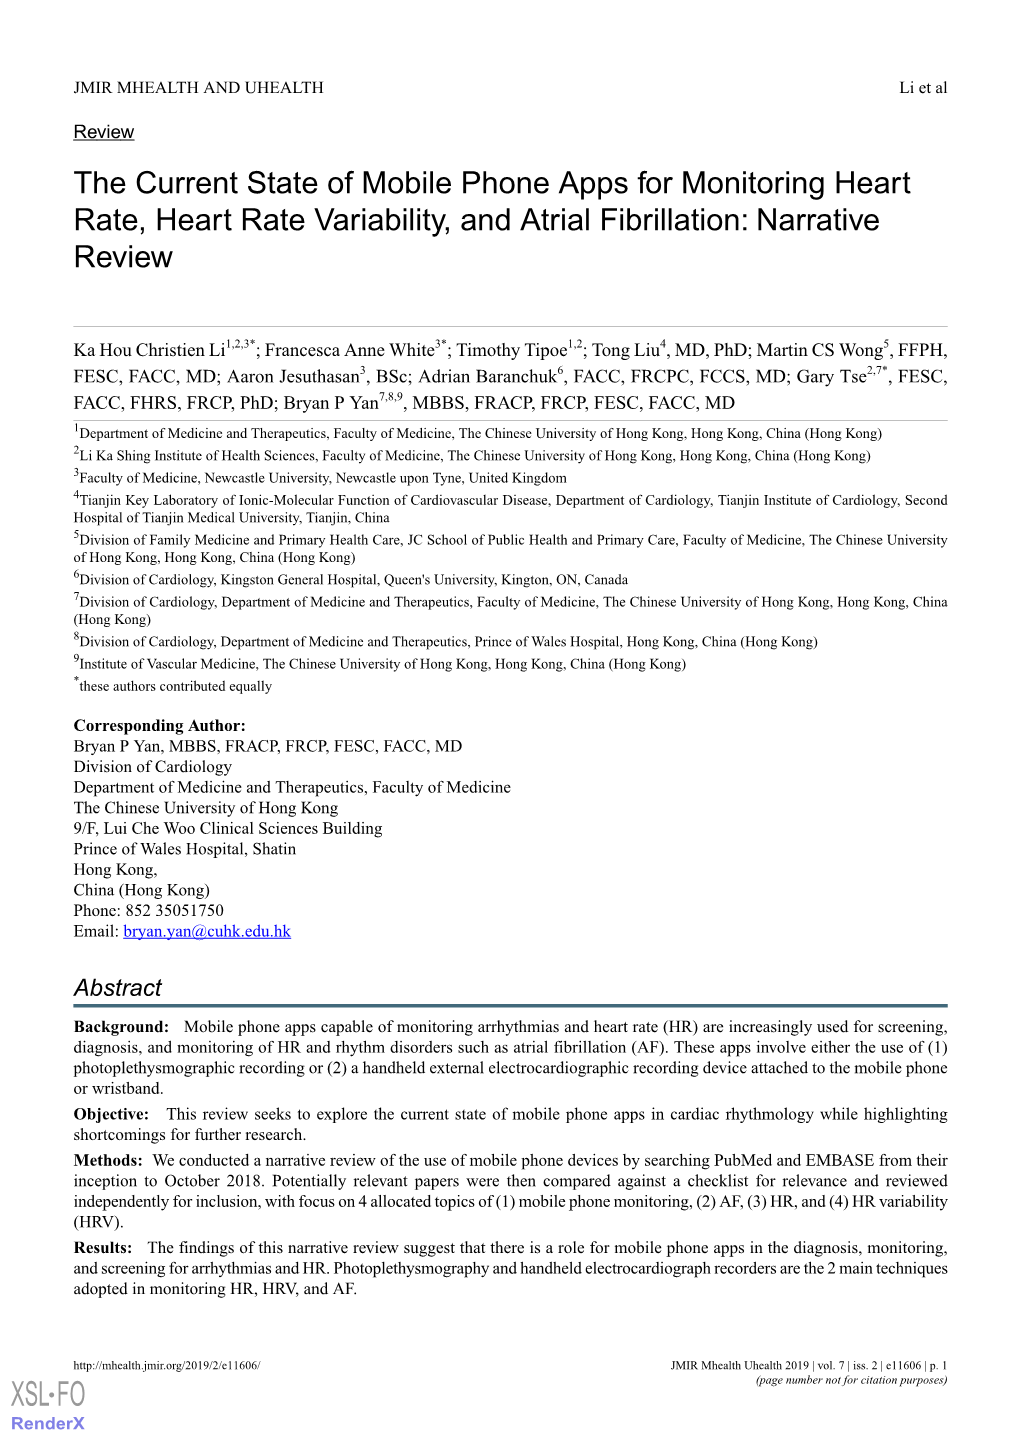 The Current State of Mobile Phone Apps for Monitoring Heart Rate, Heart Rate Variability, and Atrial Fibrillation: Narrative Review